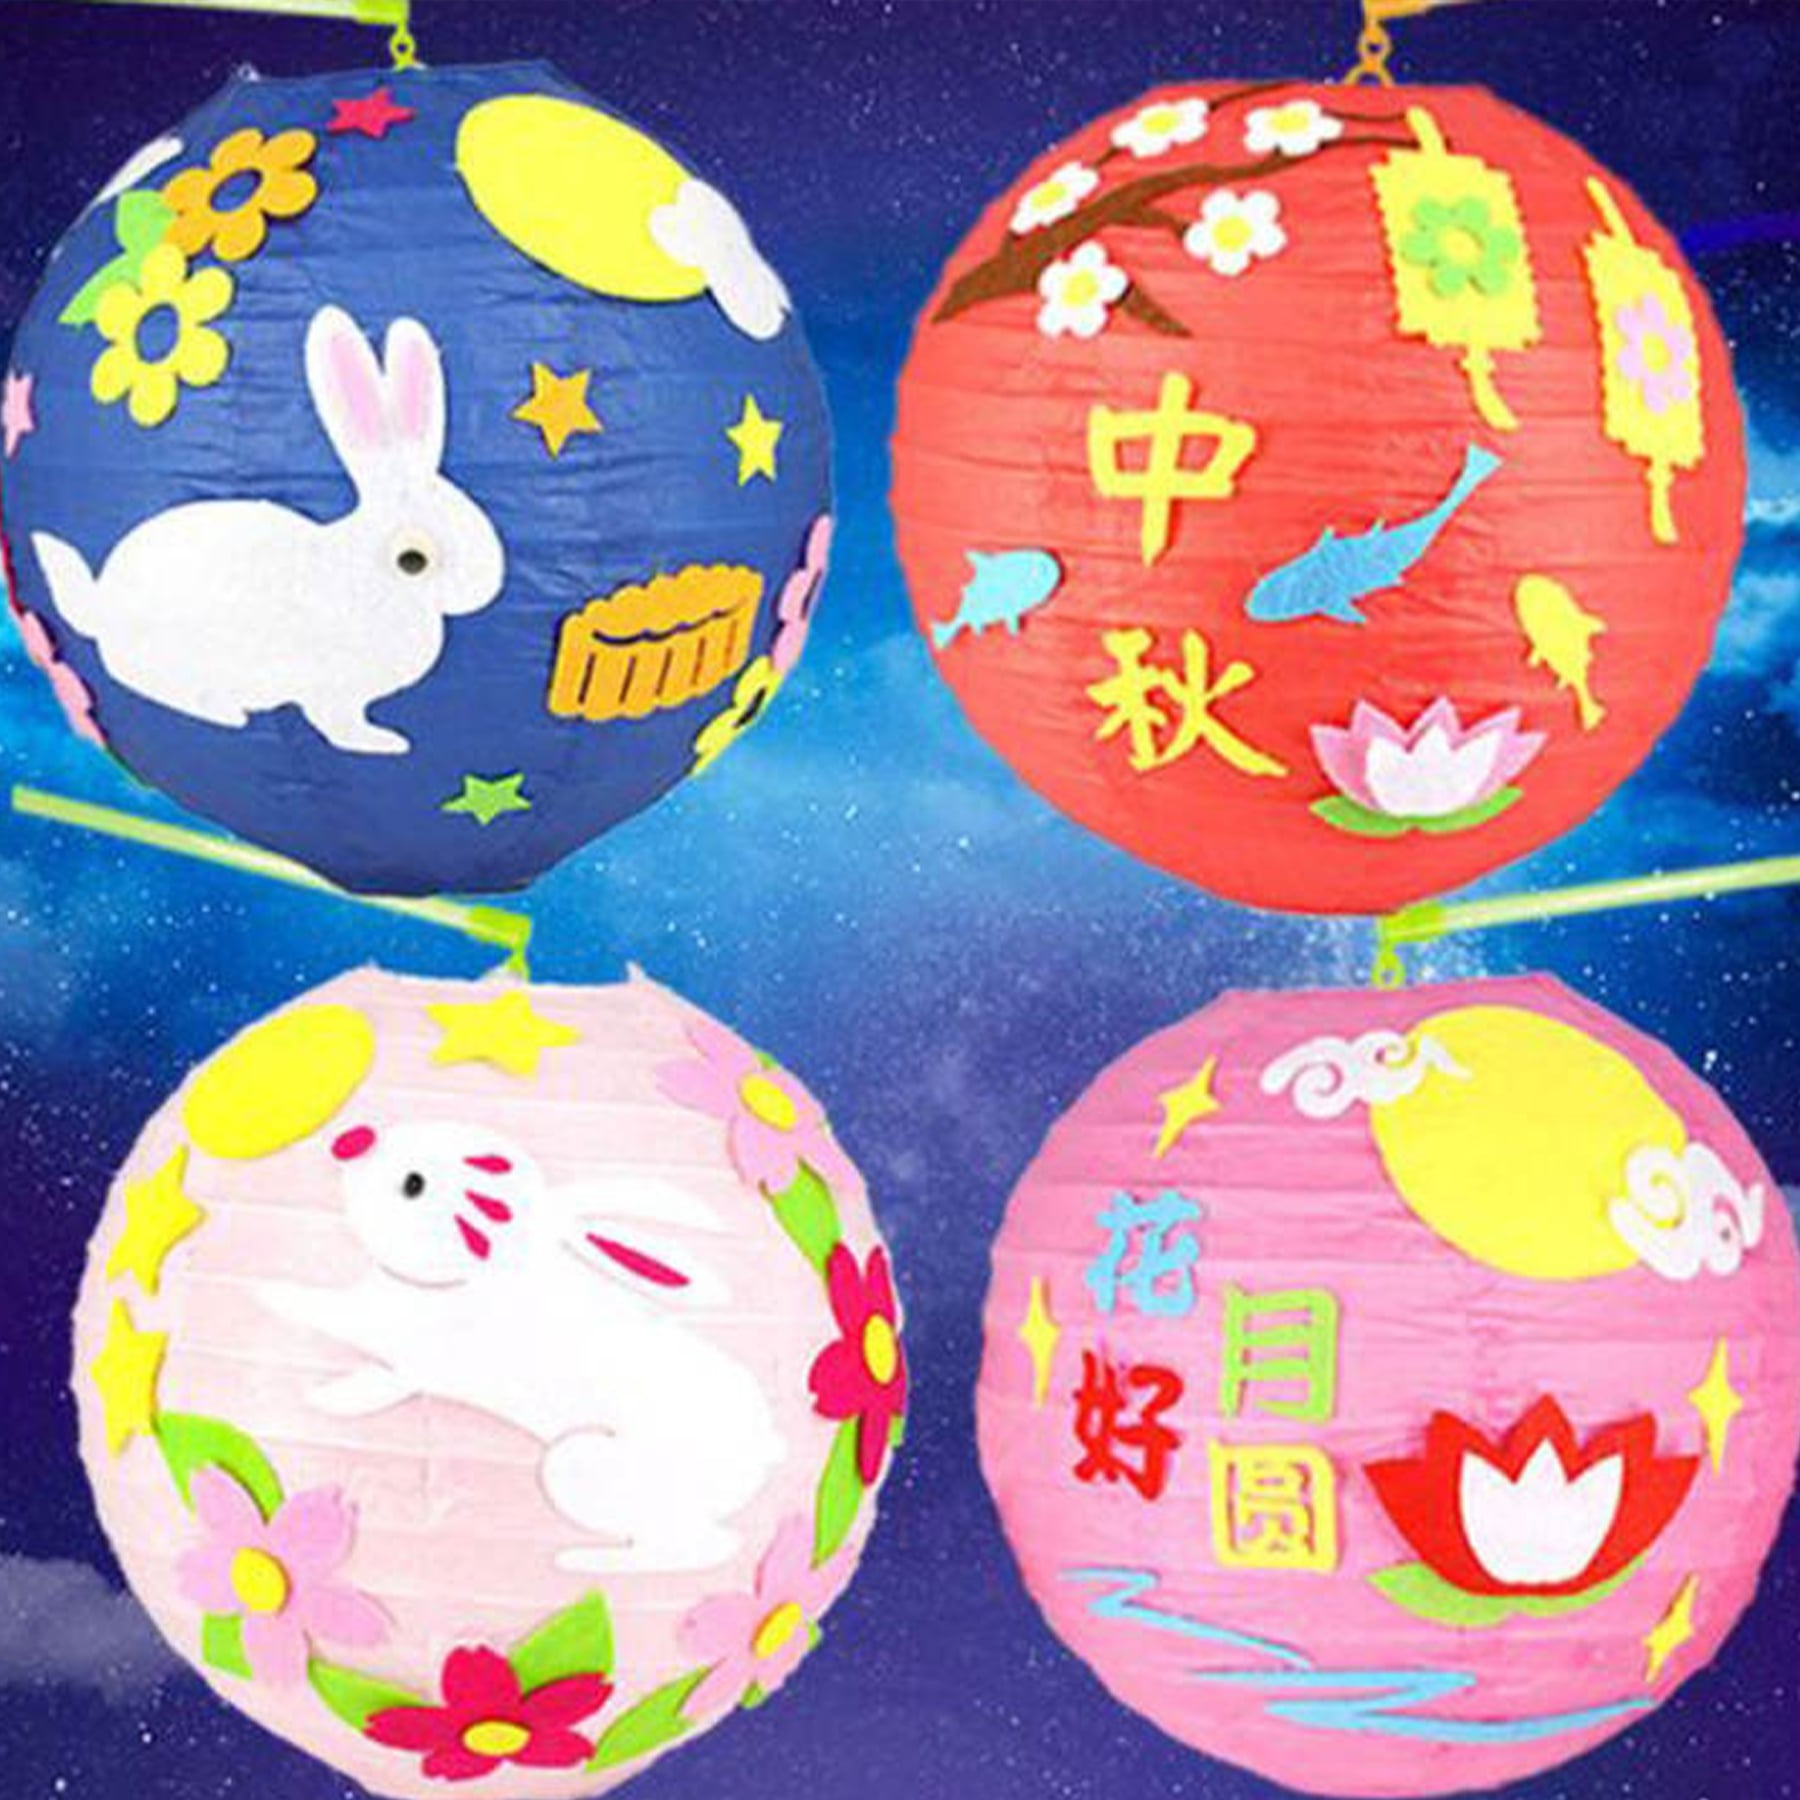 Where to buy lanterns for Mid-Autumn Festival | People's Inc.